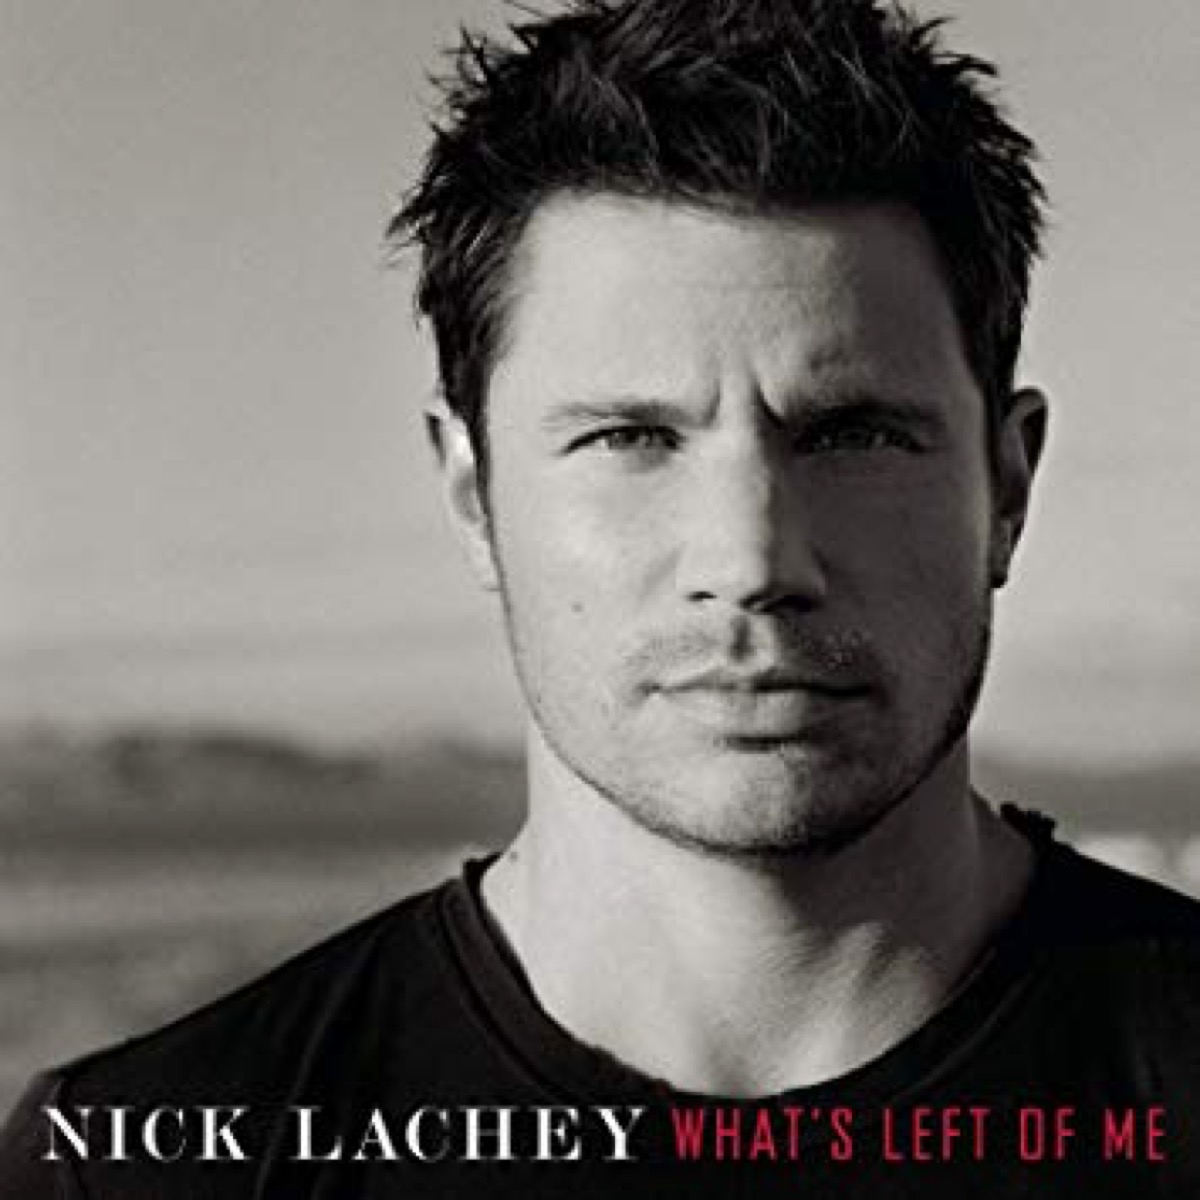 What's Left of Me by Nick Lachey